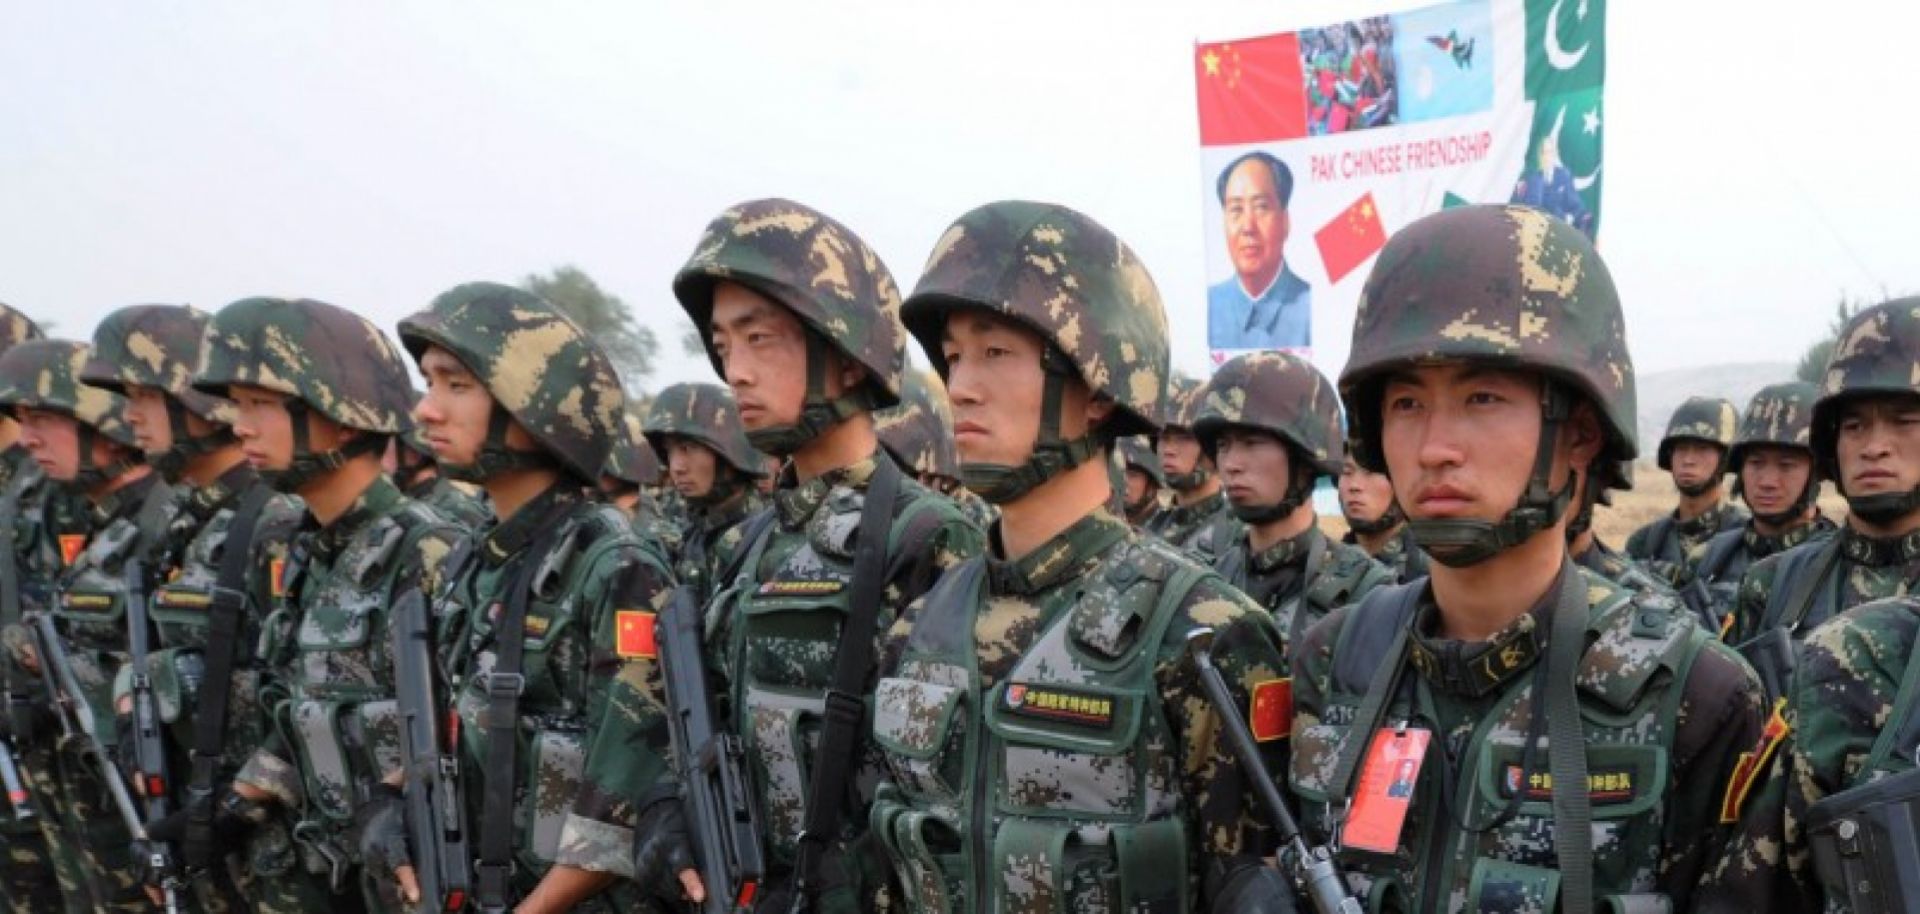 Chinese Peoples Liberation Army solders will take on a greater global role